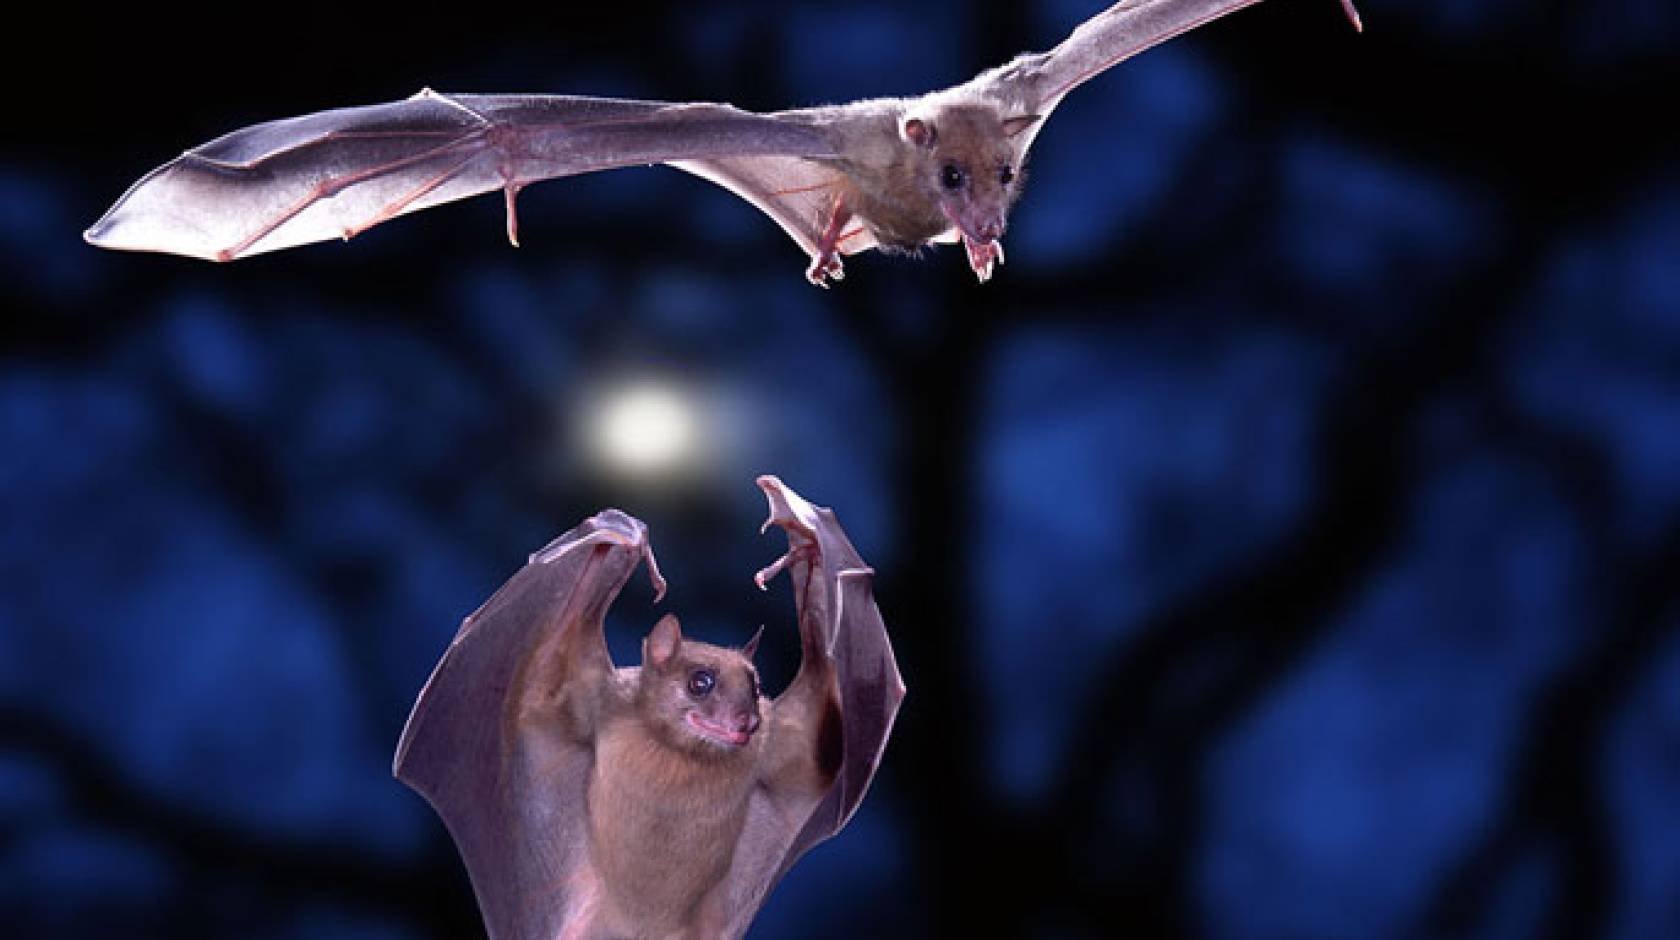 Two bats flying together